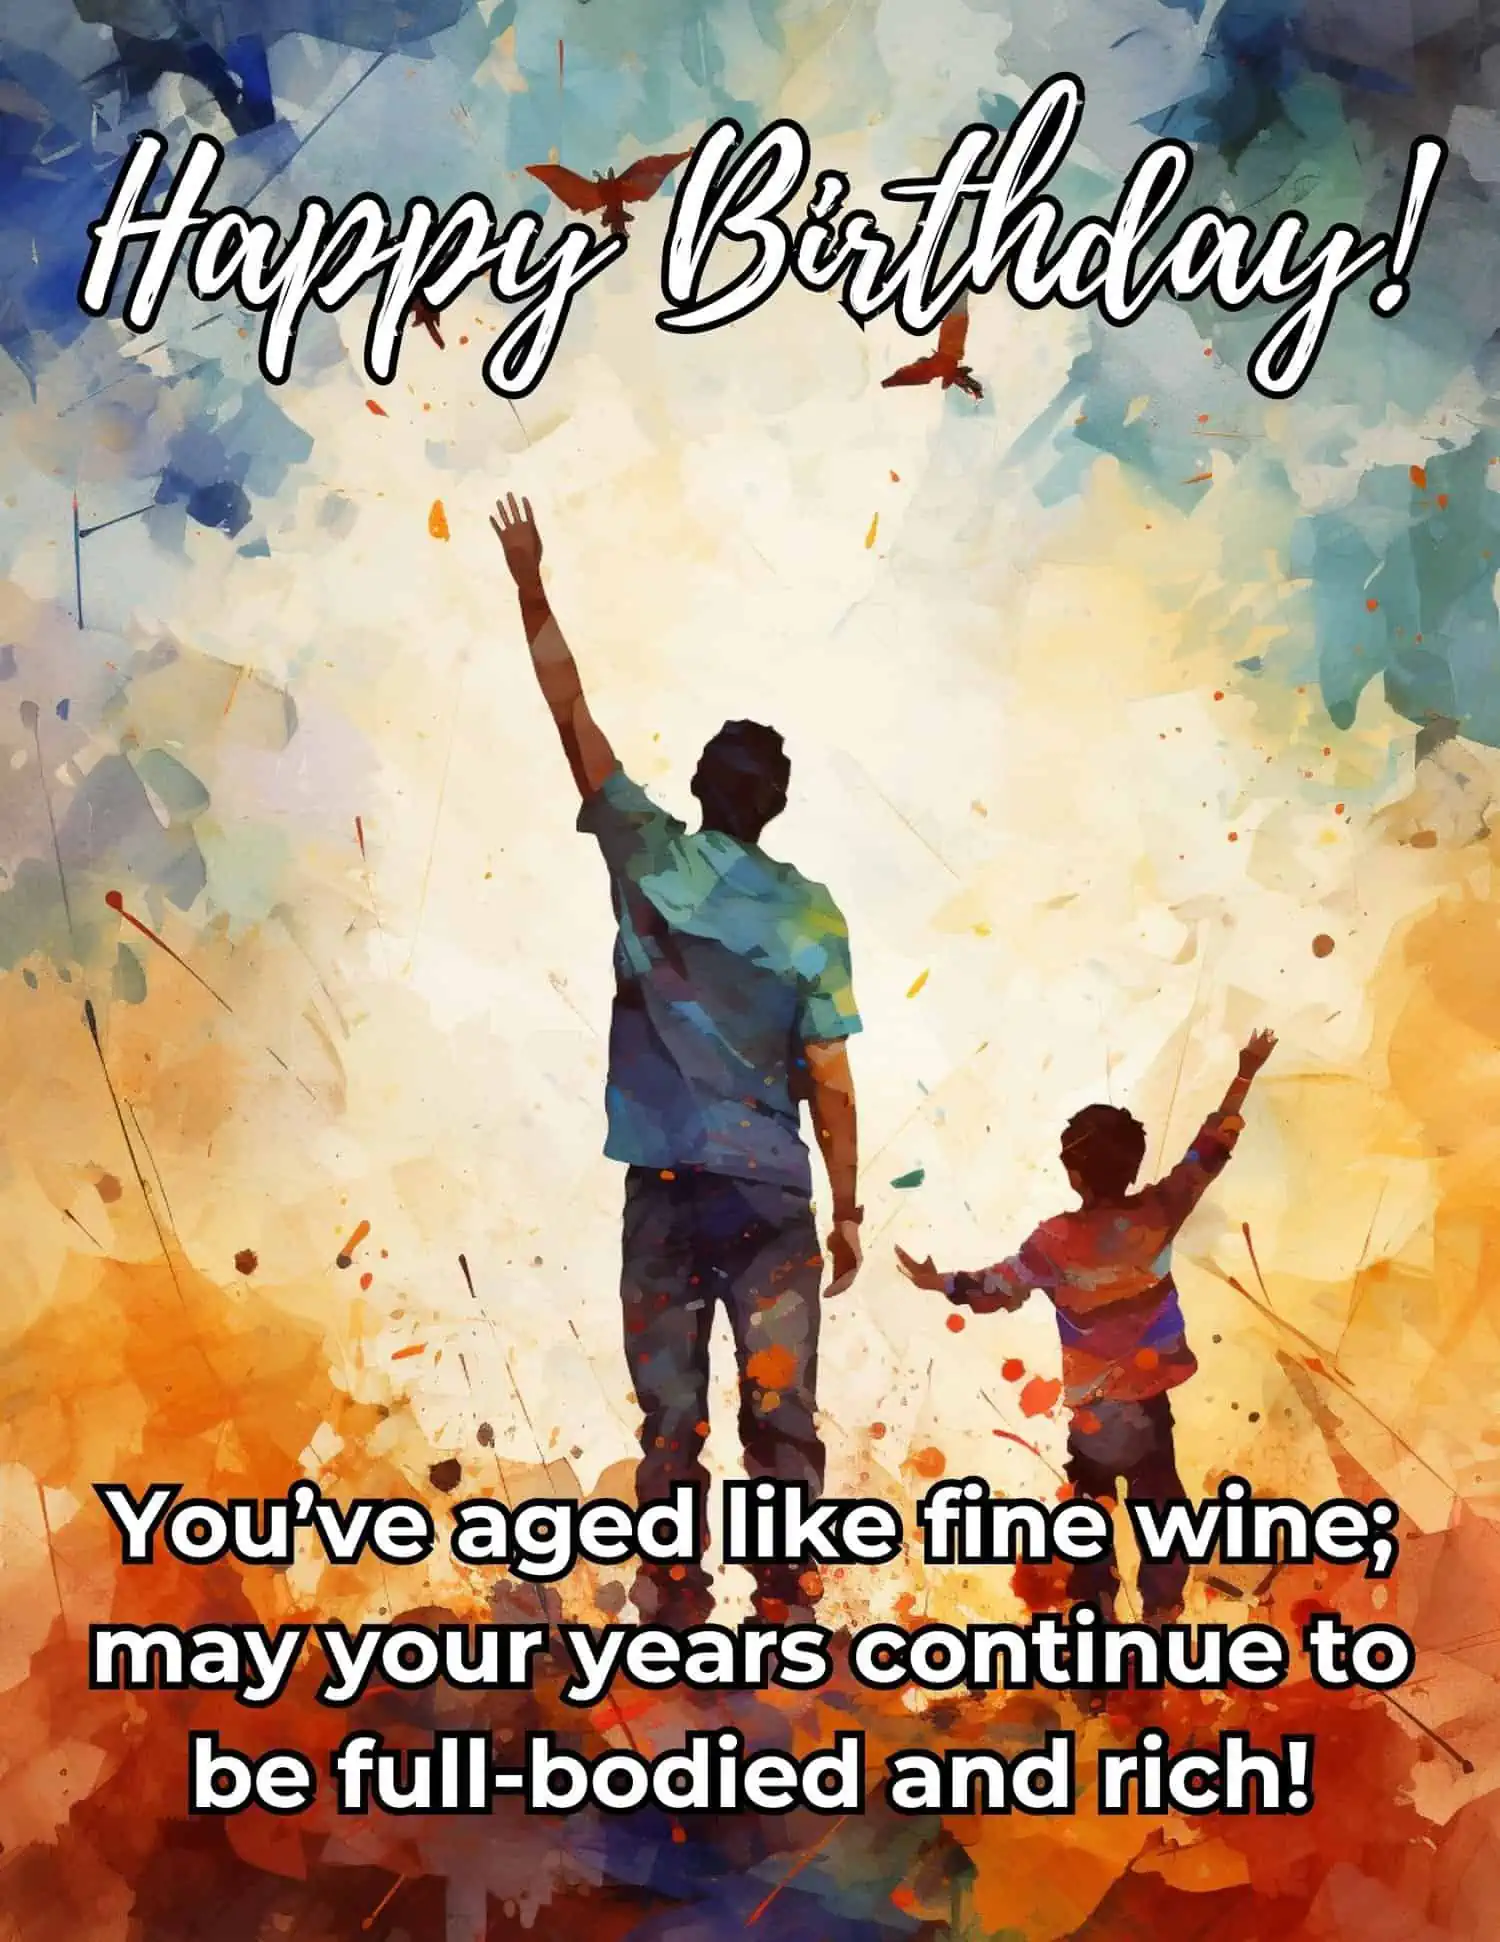 Unique and heartfelt birthday wishes for your dad-in-law to make his day extra special.